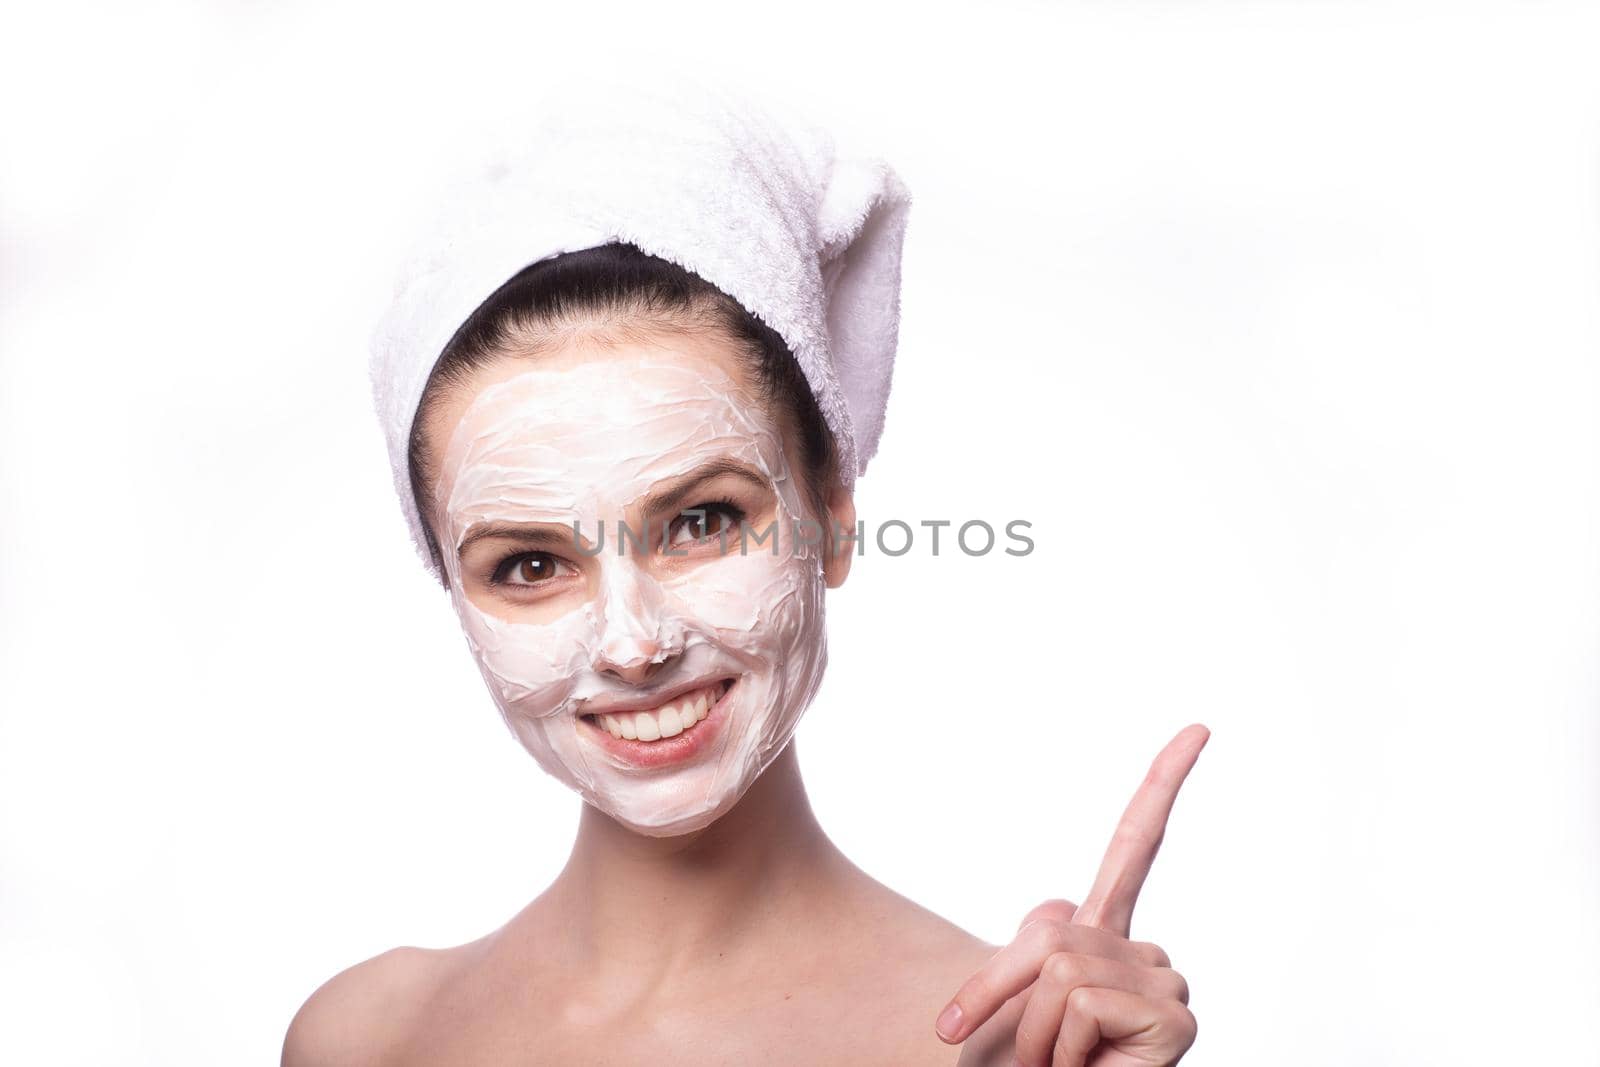 woman in a white towel on her head with a white cosmetic mask on her face, white background, close-up portrait. High quality photo